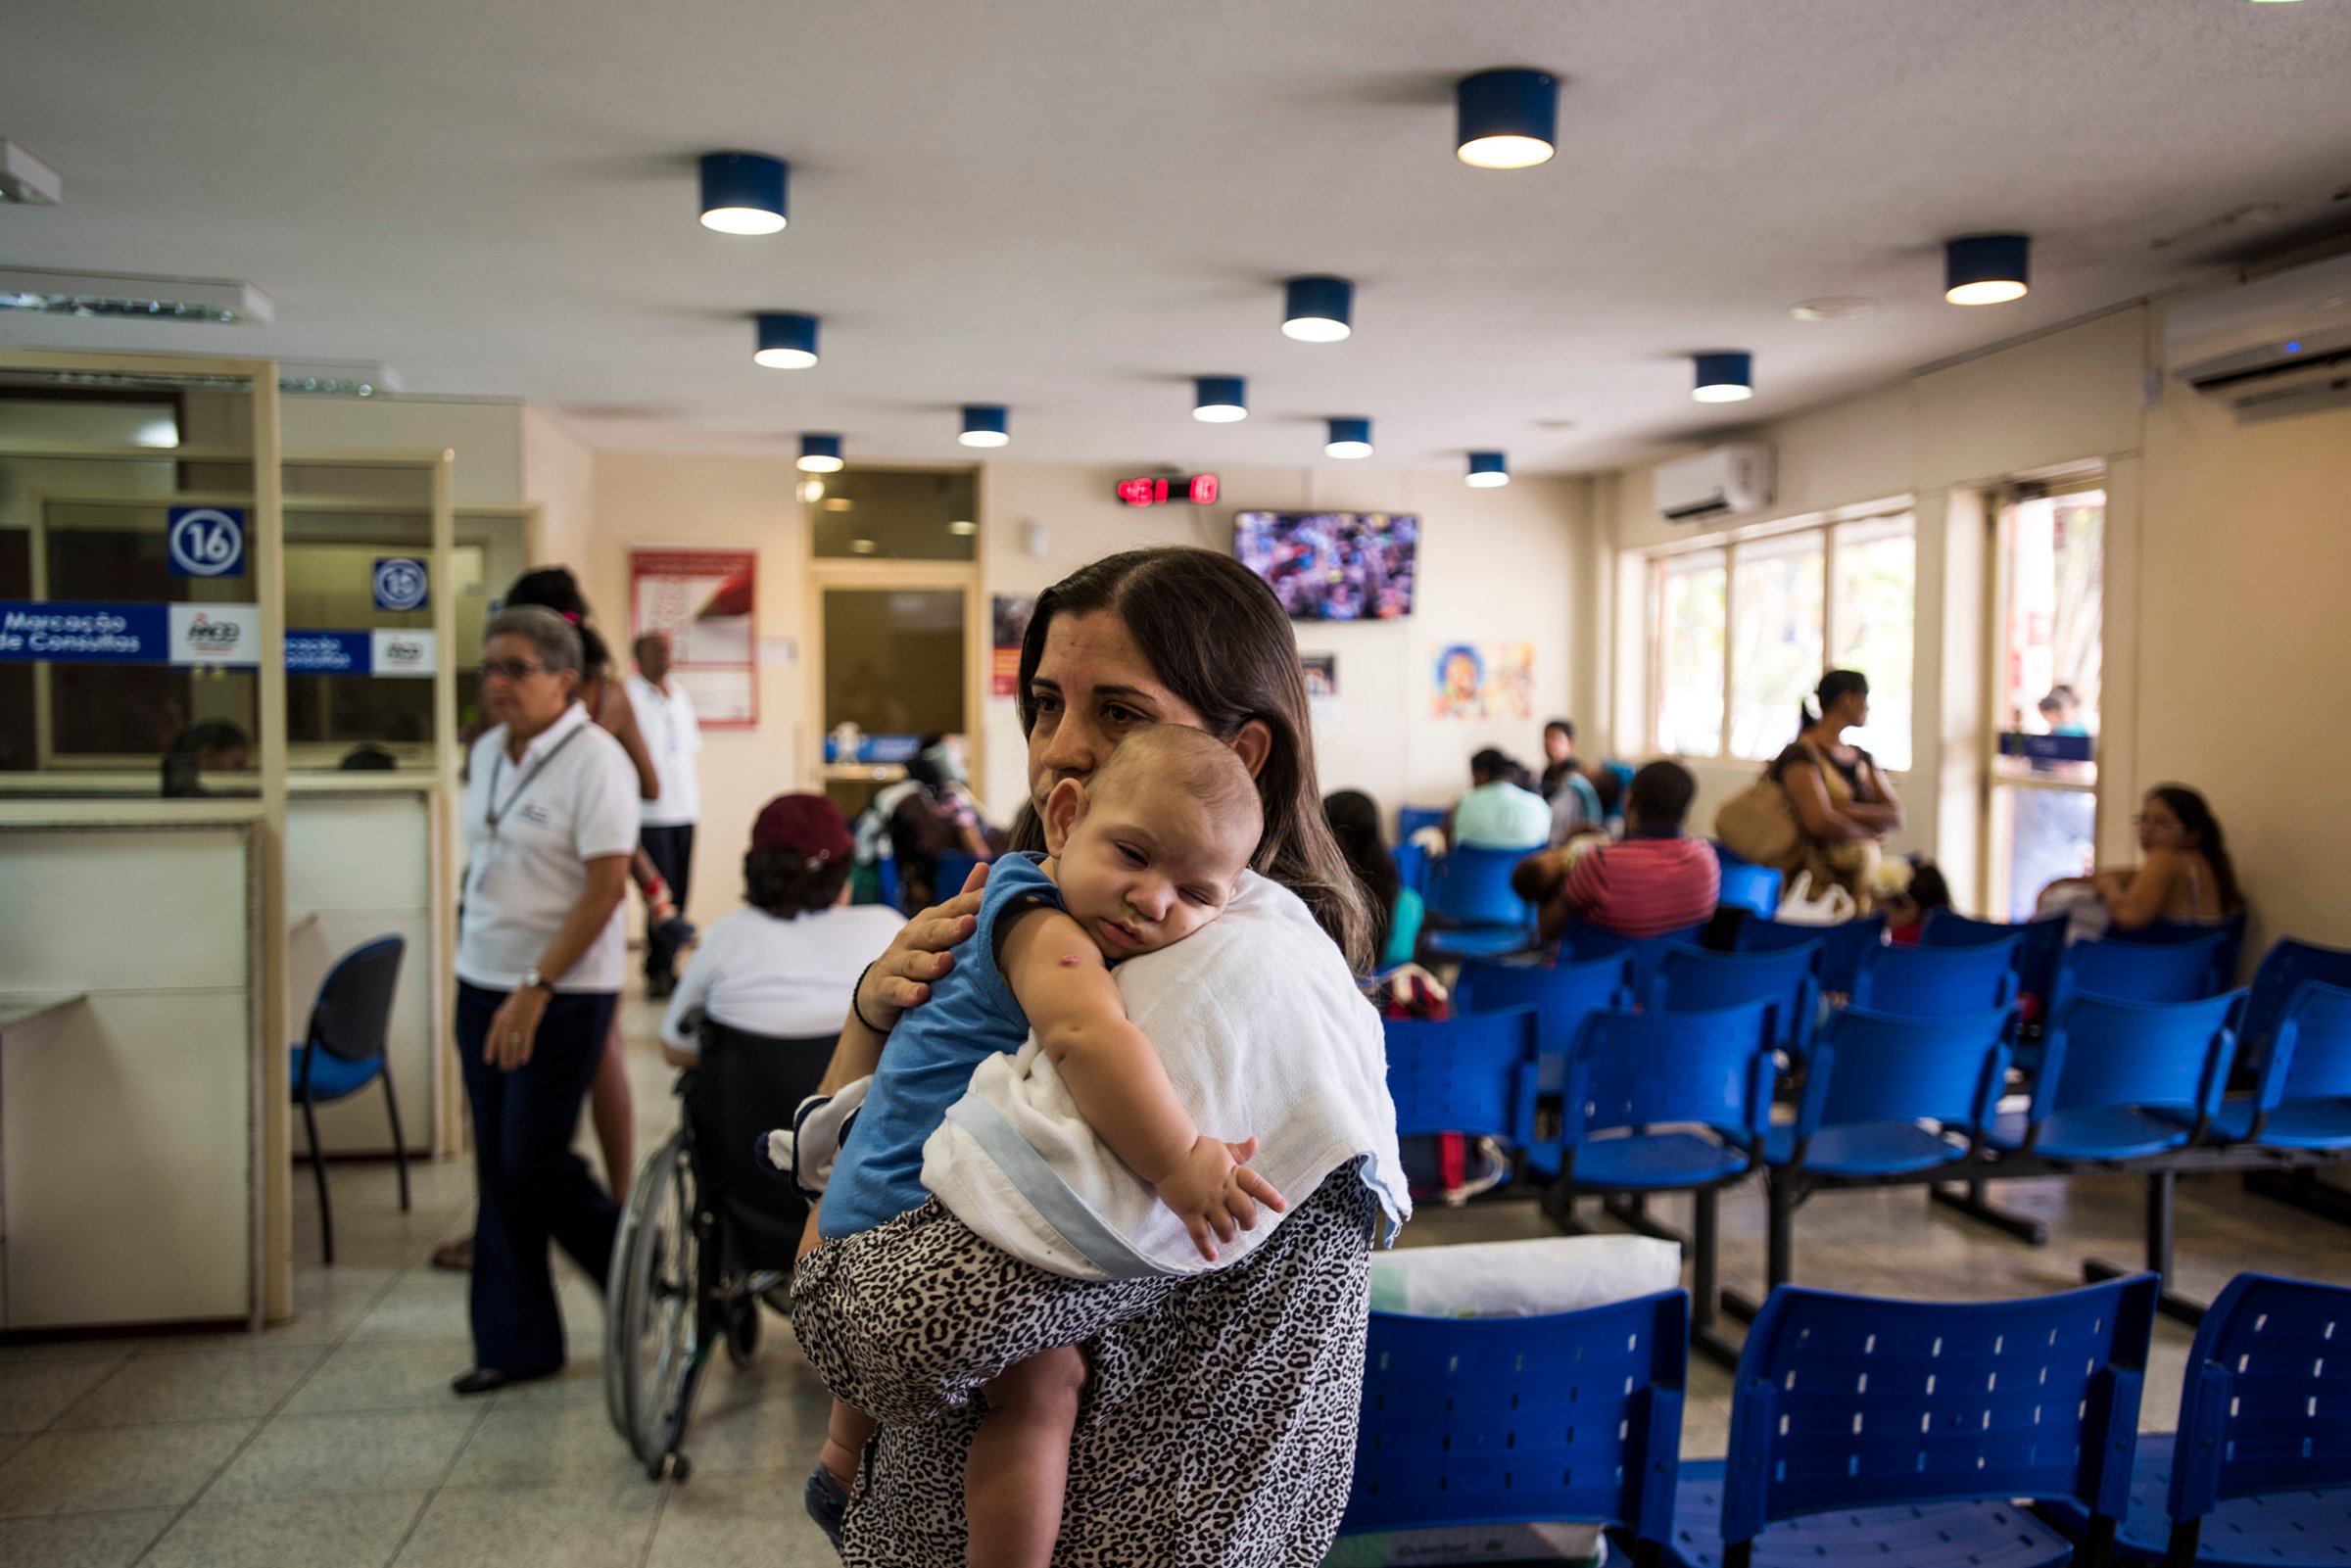 Isabel Albuquerque and her son in the waiting room of Associacao de Assistencia a Crianca Deficiente, a rehabilitation center for disabled children, in Recife, Brazil, Feb. 1, 2016.